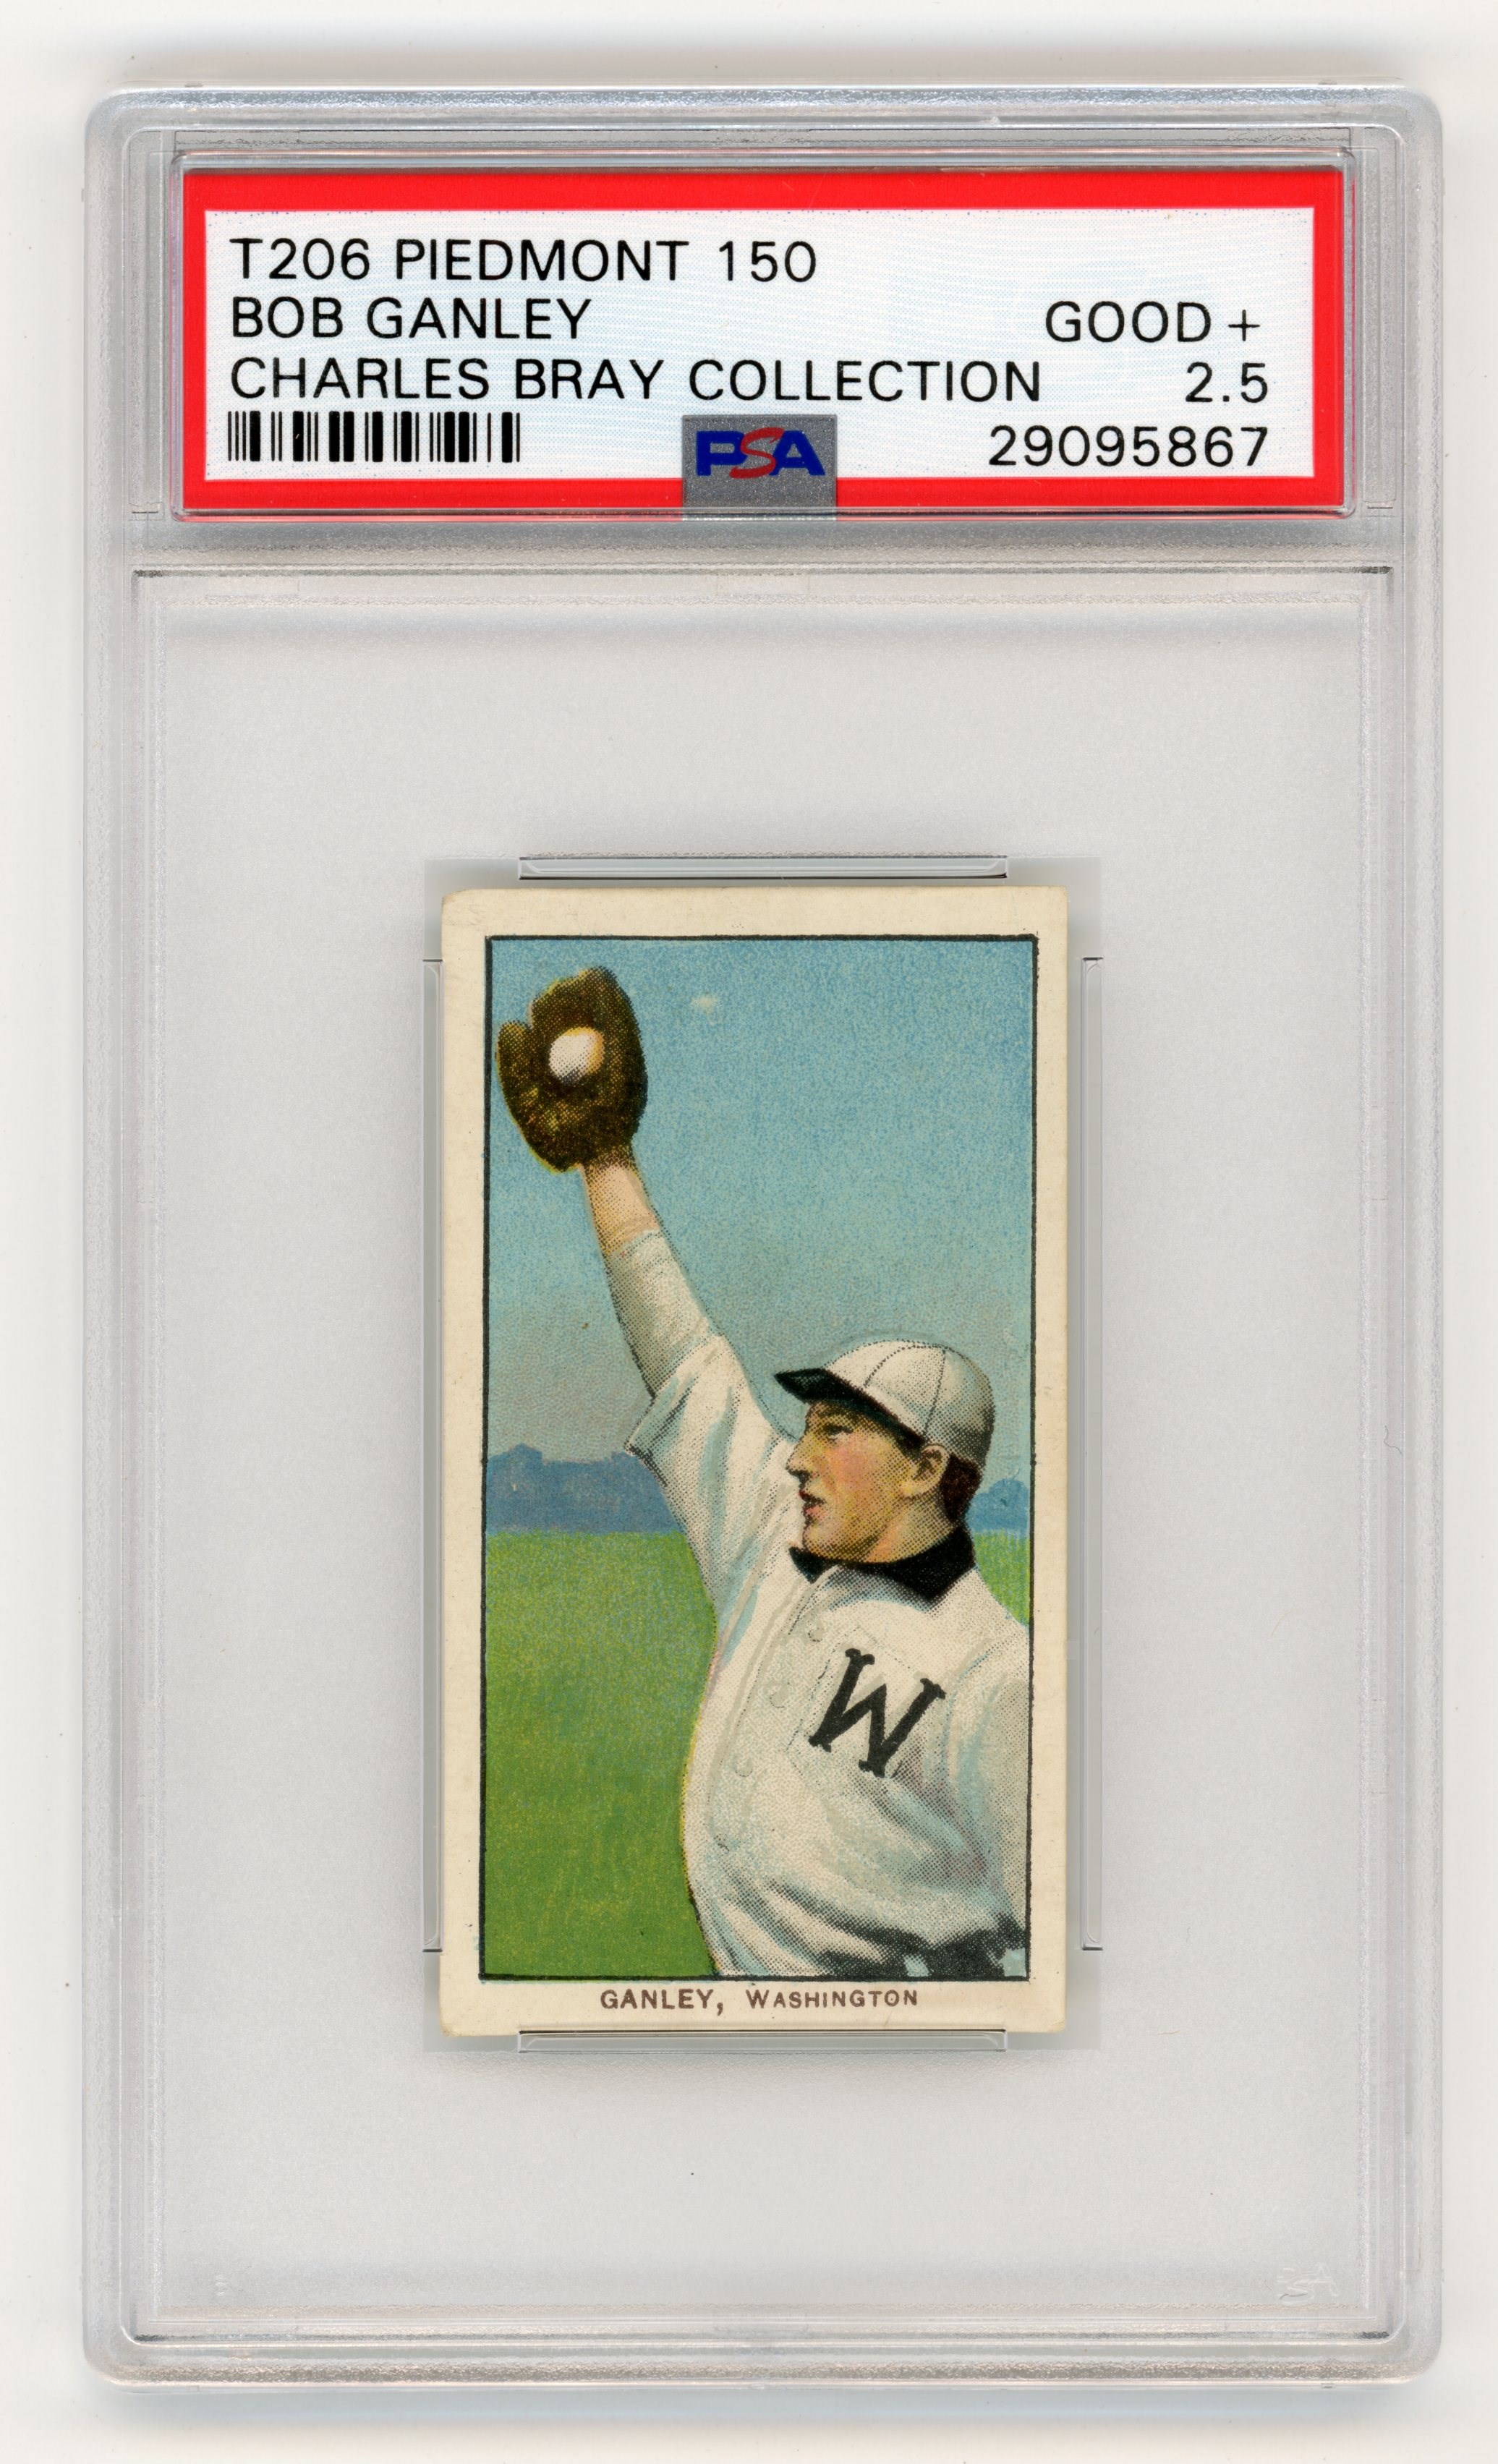 T206 Piedmont 150 Bob Ganley  PSA GOOD+ 2.5 From the Charles Bray Collection.